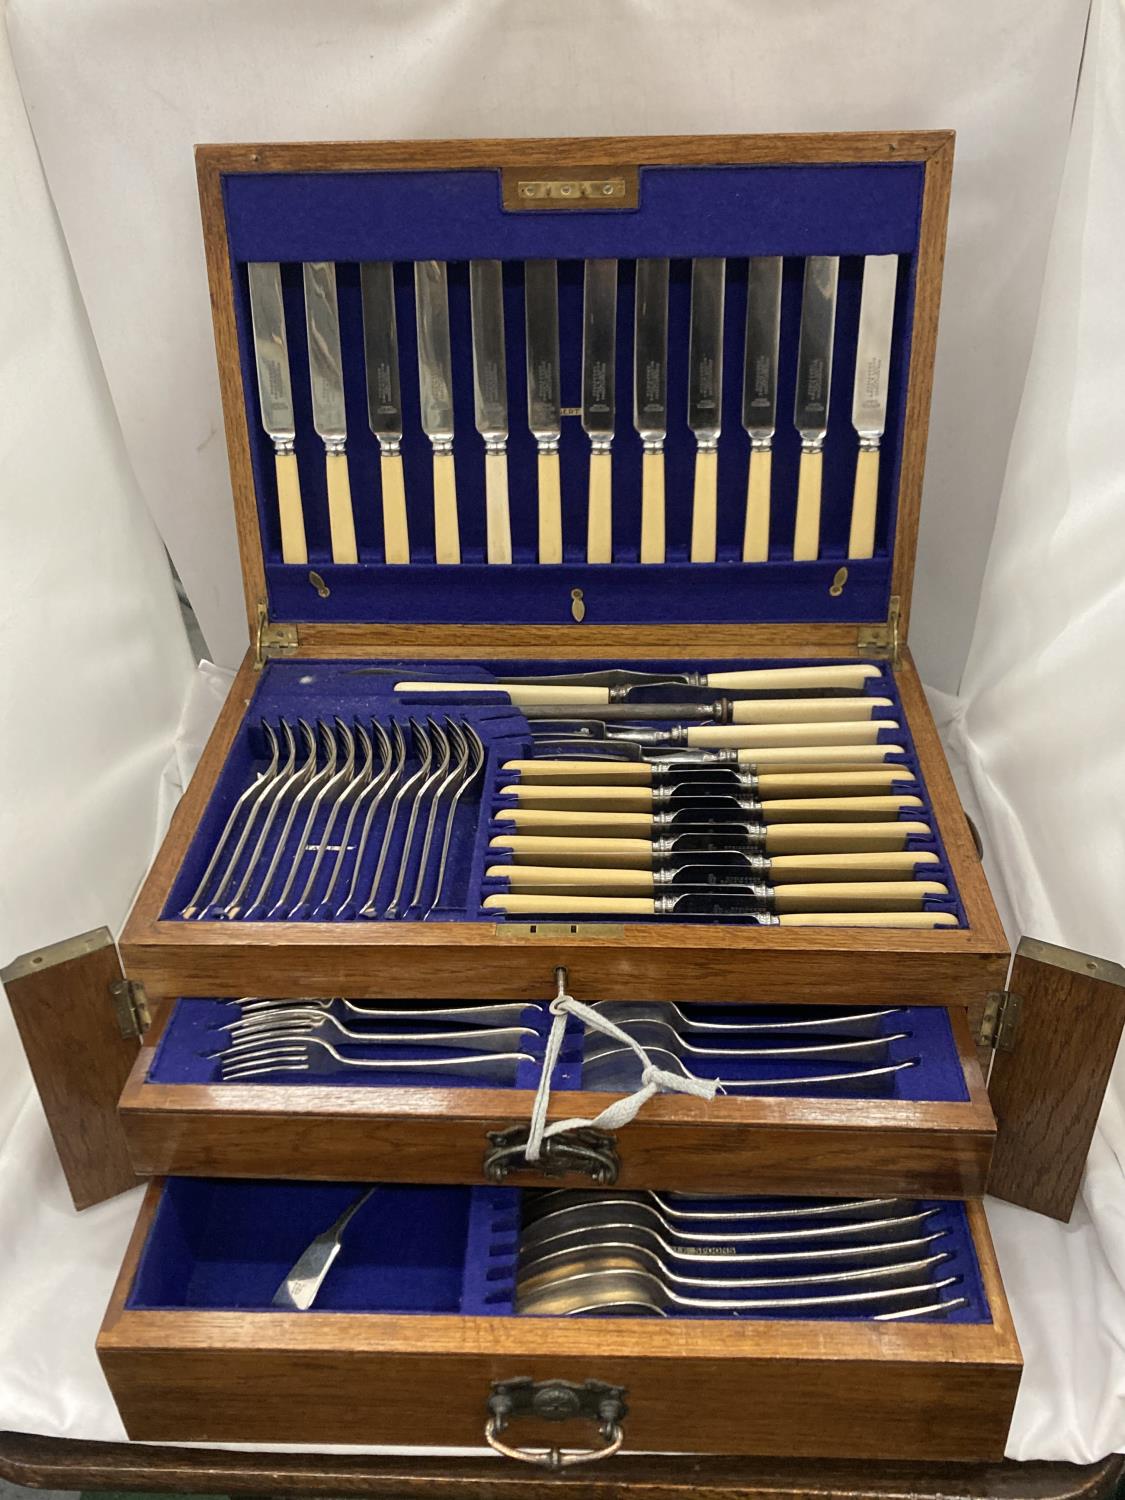 A CASED CANTEEN OF CUTLERY WITH LIFT UP TOP CONTAINING KNIVES, FORKS AND CARVING EQUIPMENT, A DRAWER - Image 2 of 5